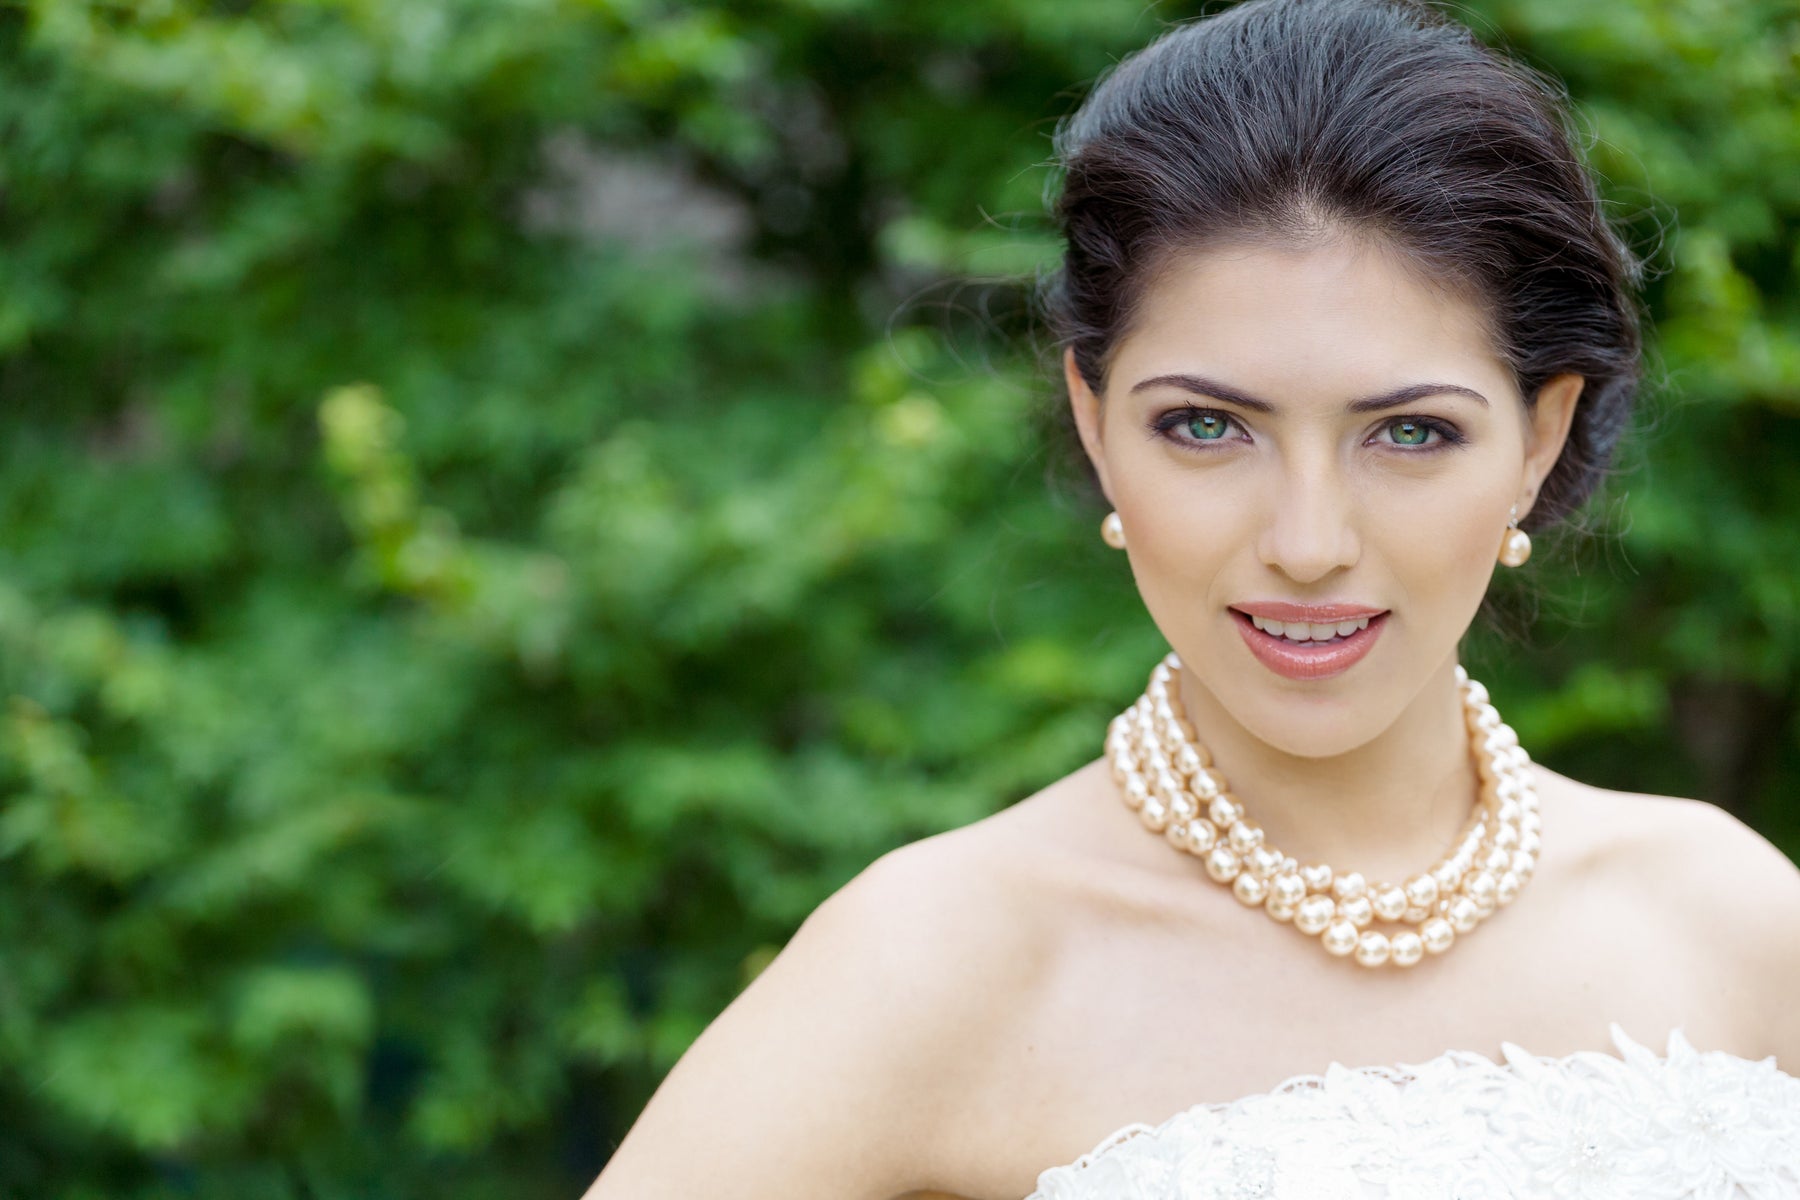 A Bride in front of green trees. The Bride is wearing blush colored pearls from Anna Bellagio.